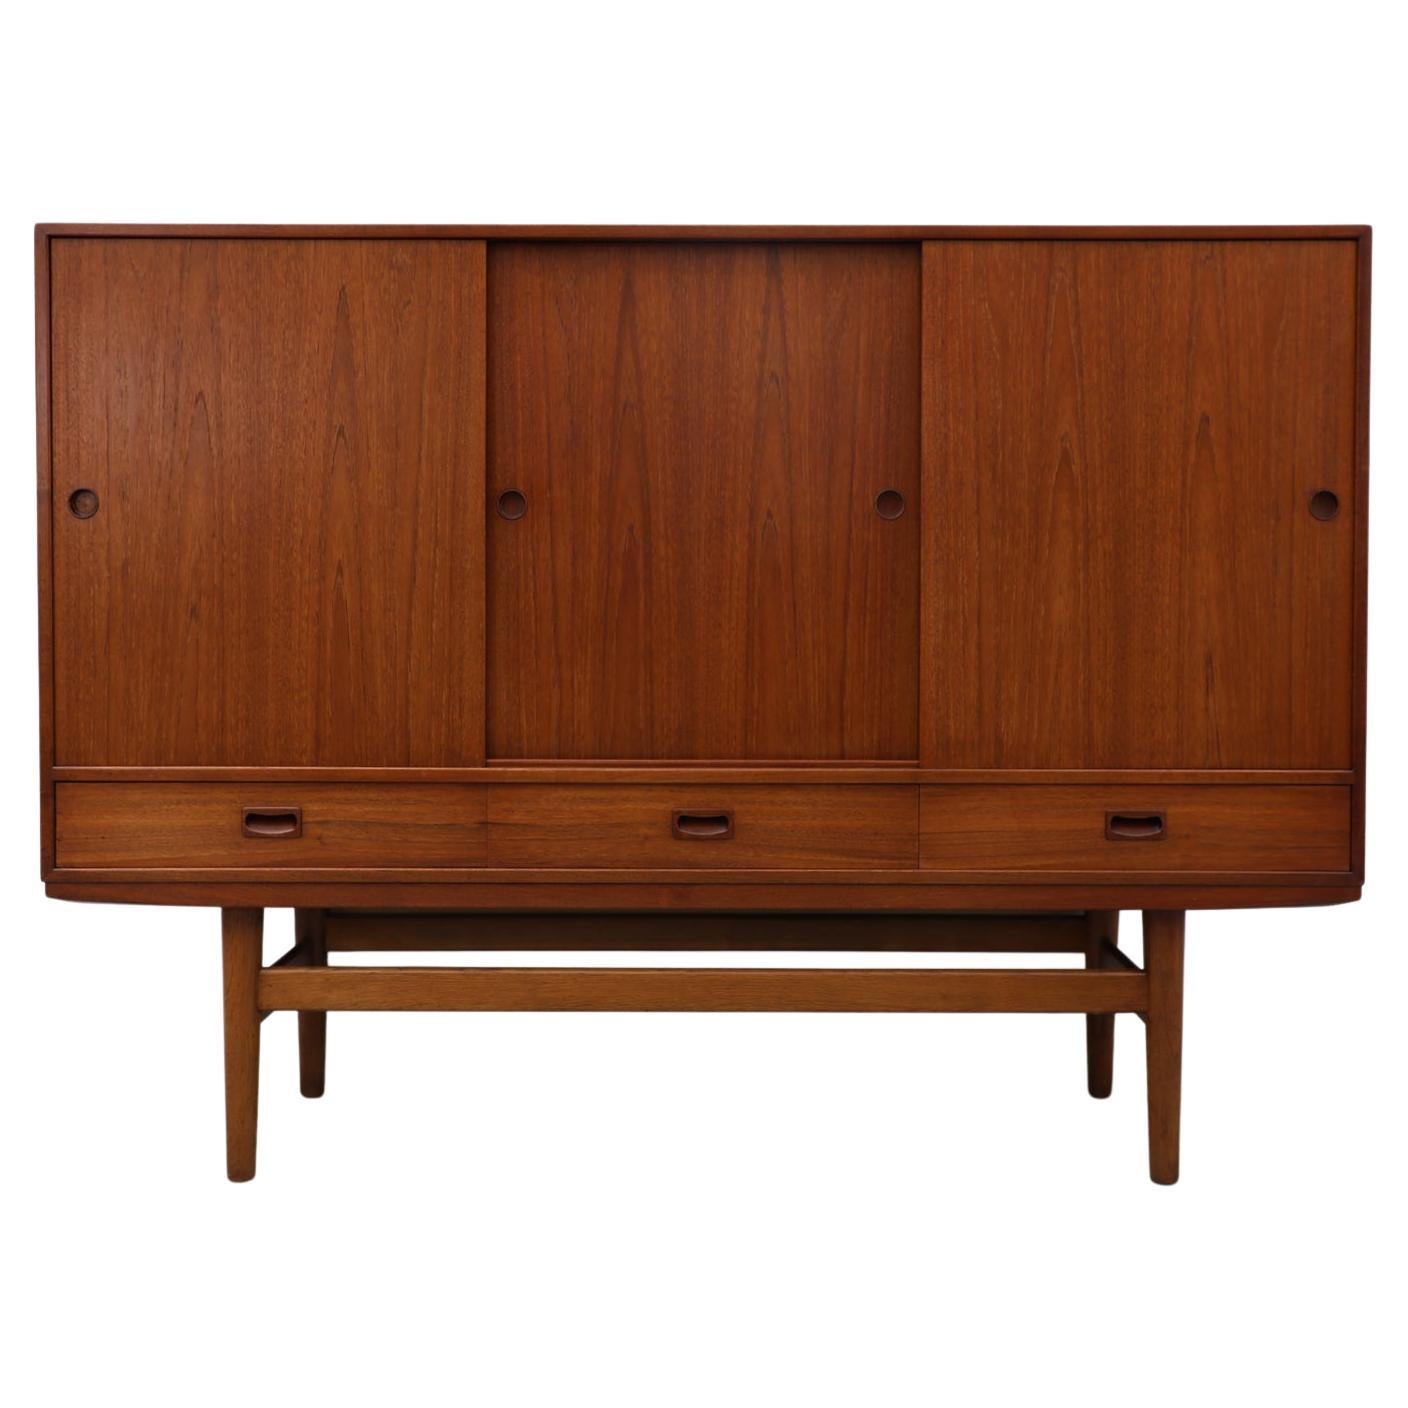 Mid-Century Danish Teak Highboard with Sliding Door Cabinets and Drawers